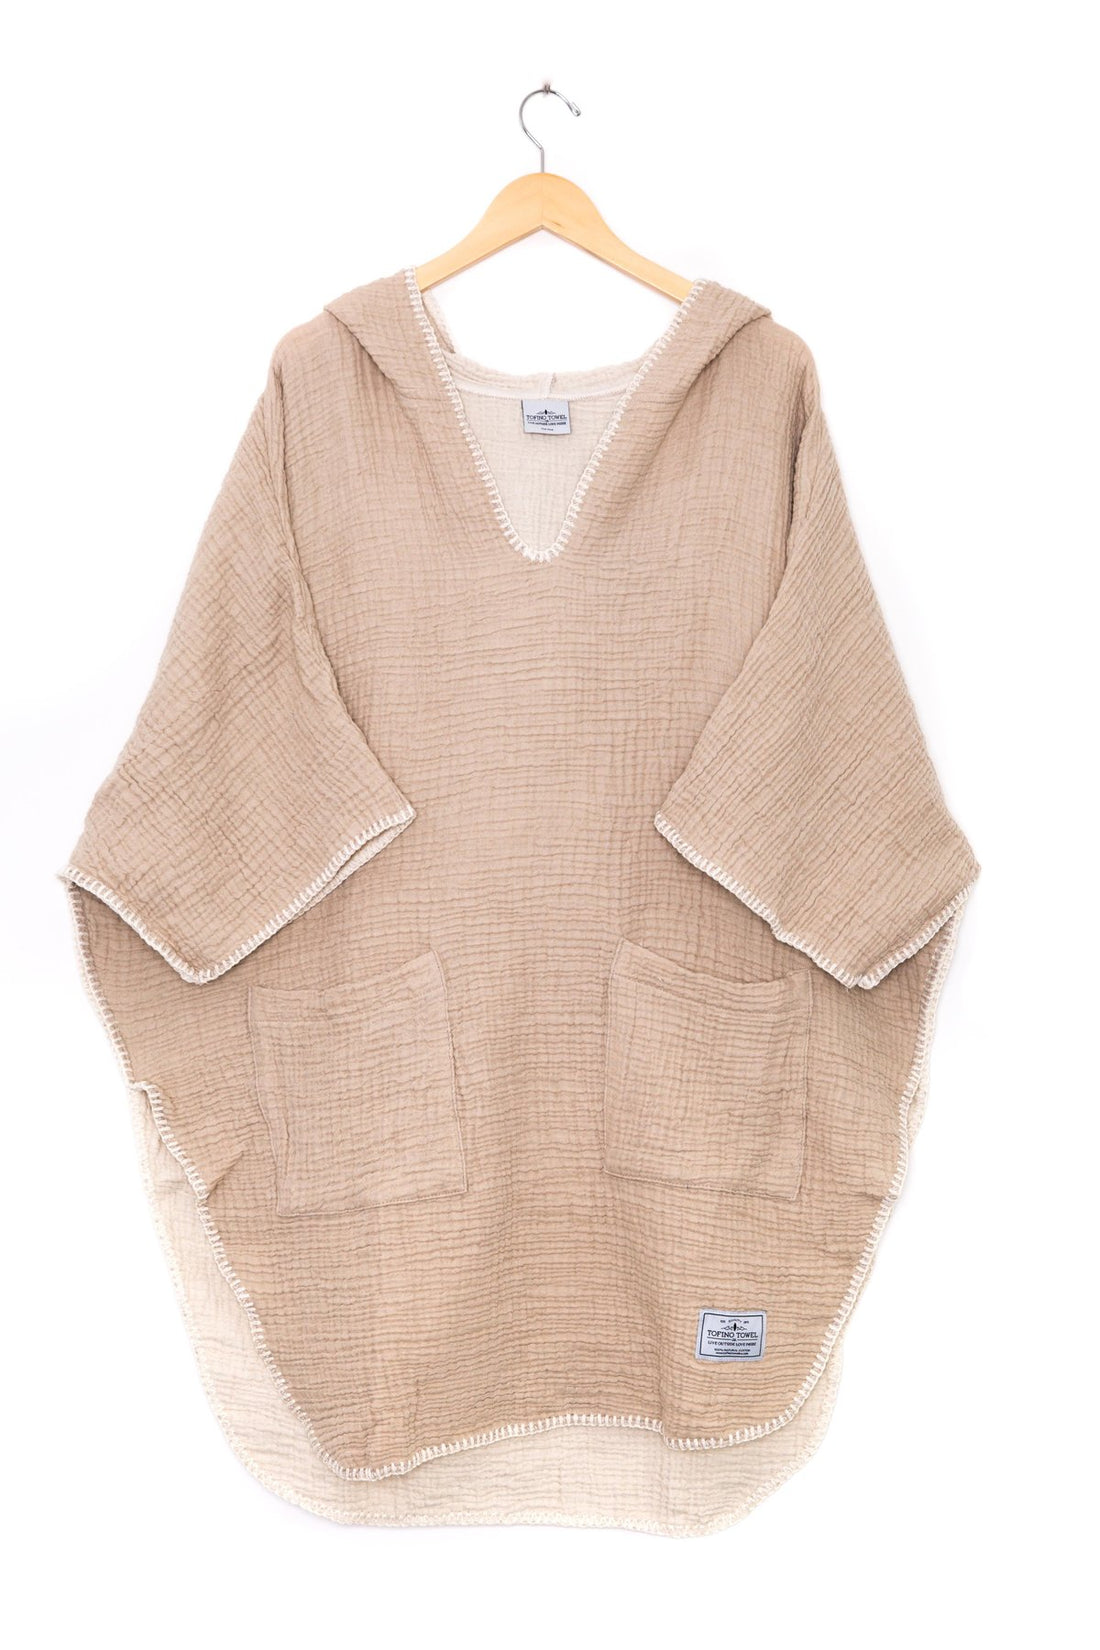 WOMEN'S COCOON SURF PONCHO